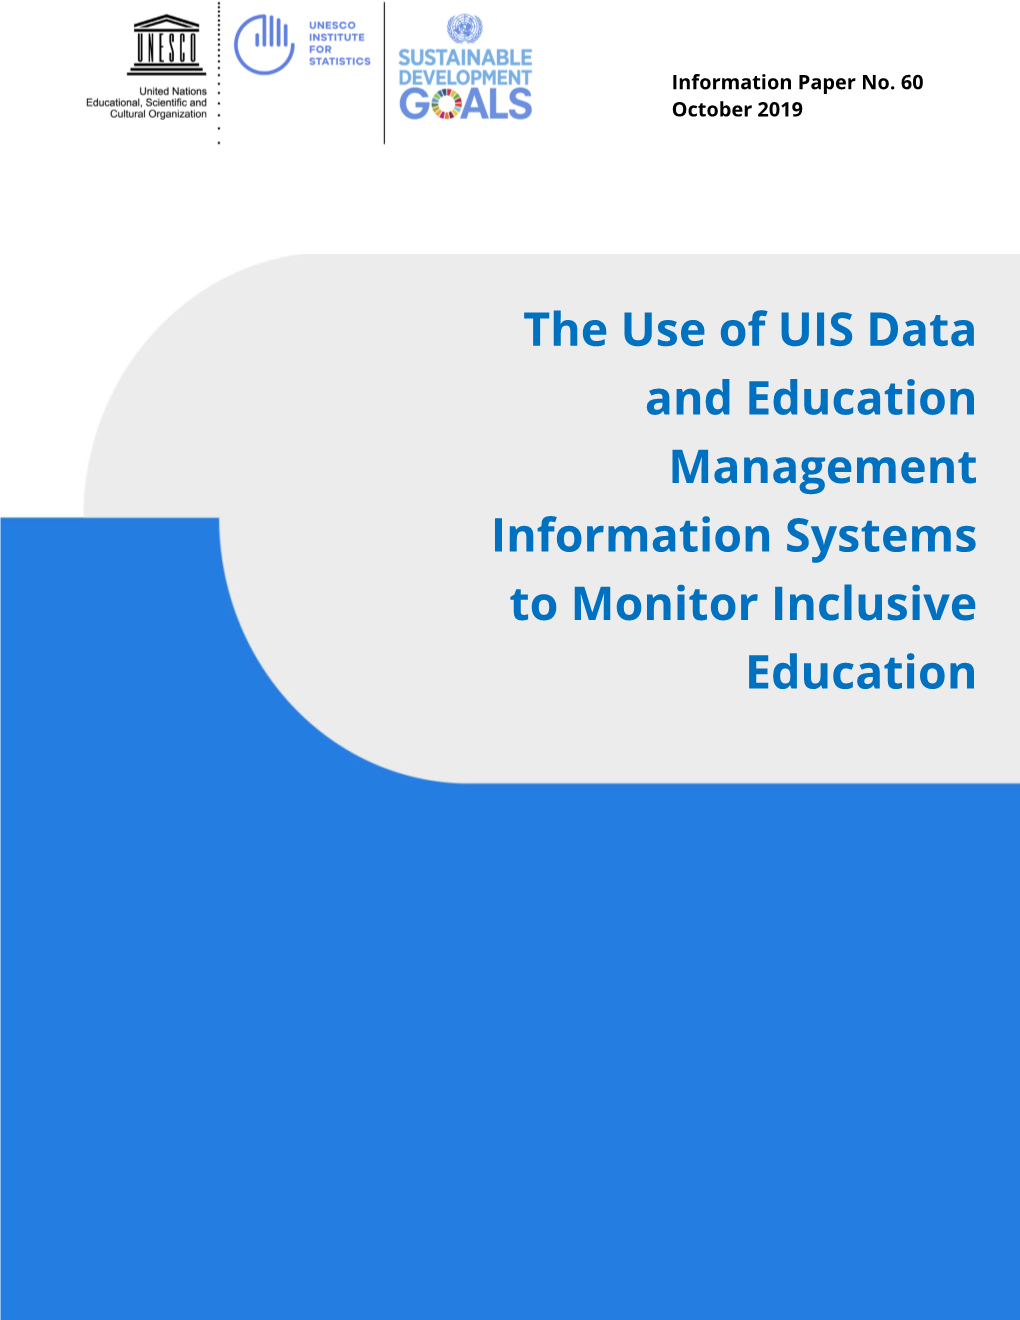 The Use of UIS Data and EMIS to Monitor Inclusive Education